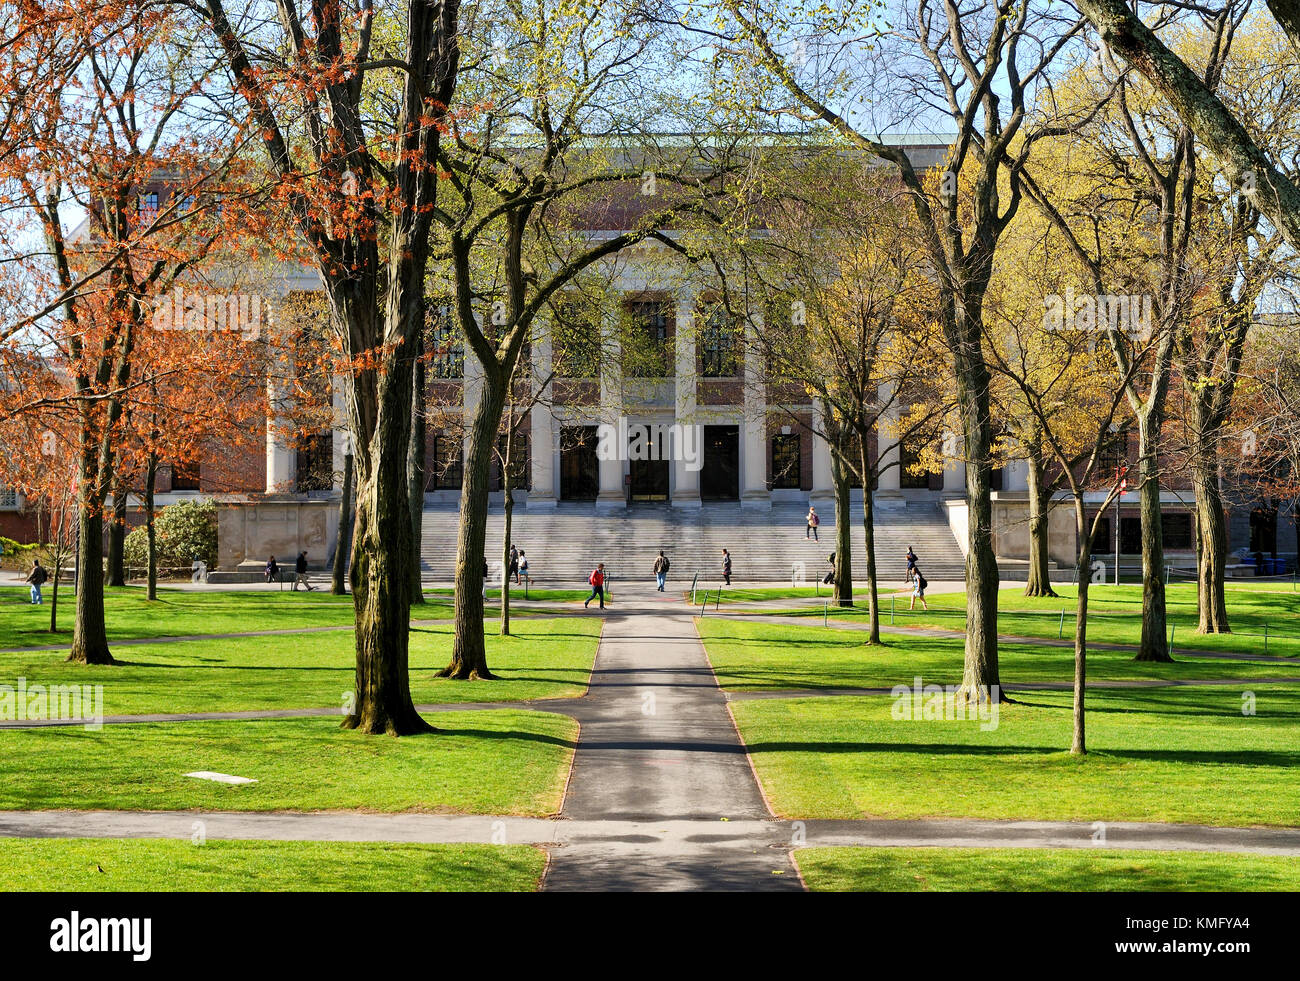 Harvard University. College campus and library in early spring, people walking by in background. Stock Photo